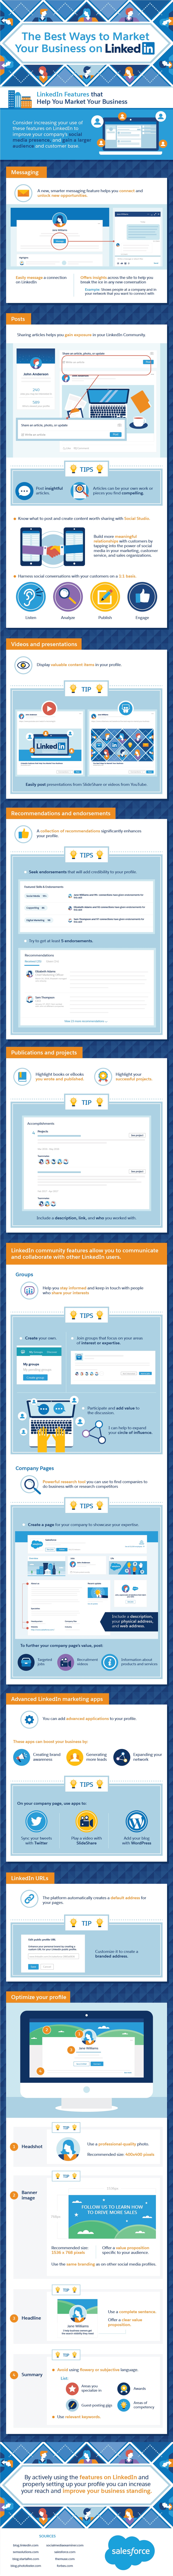 market your business on linkedin infographic